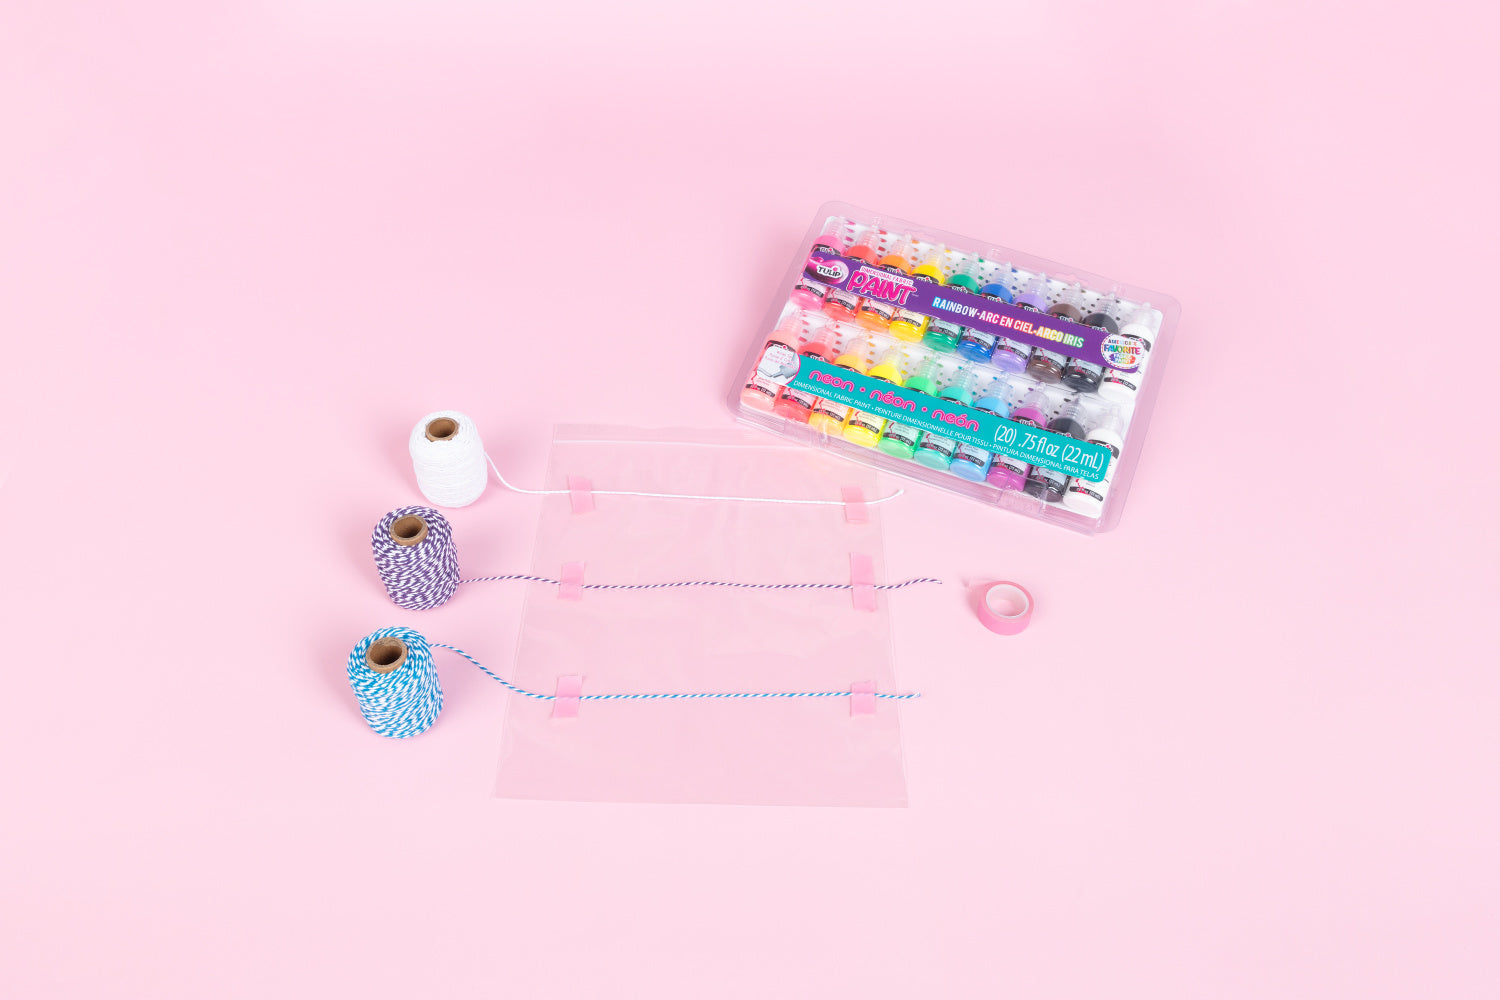 Prepare materials for DIY friendship bracelets with Puff Paint